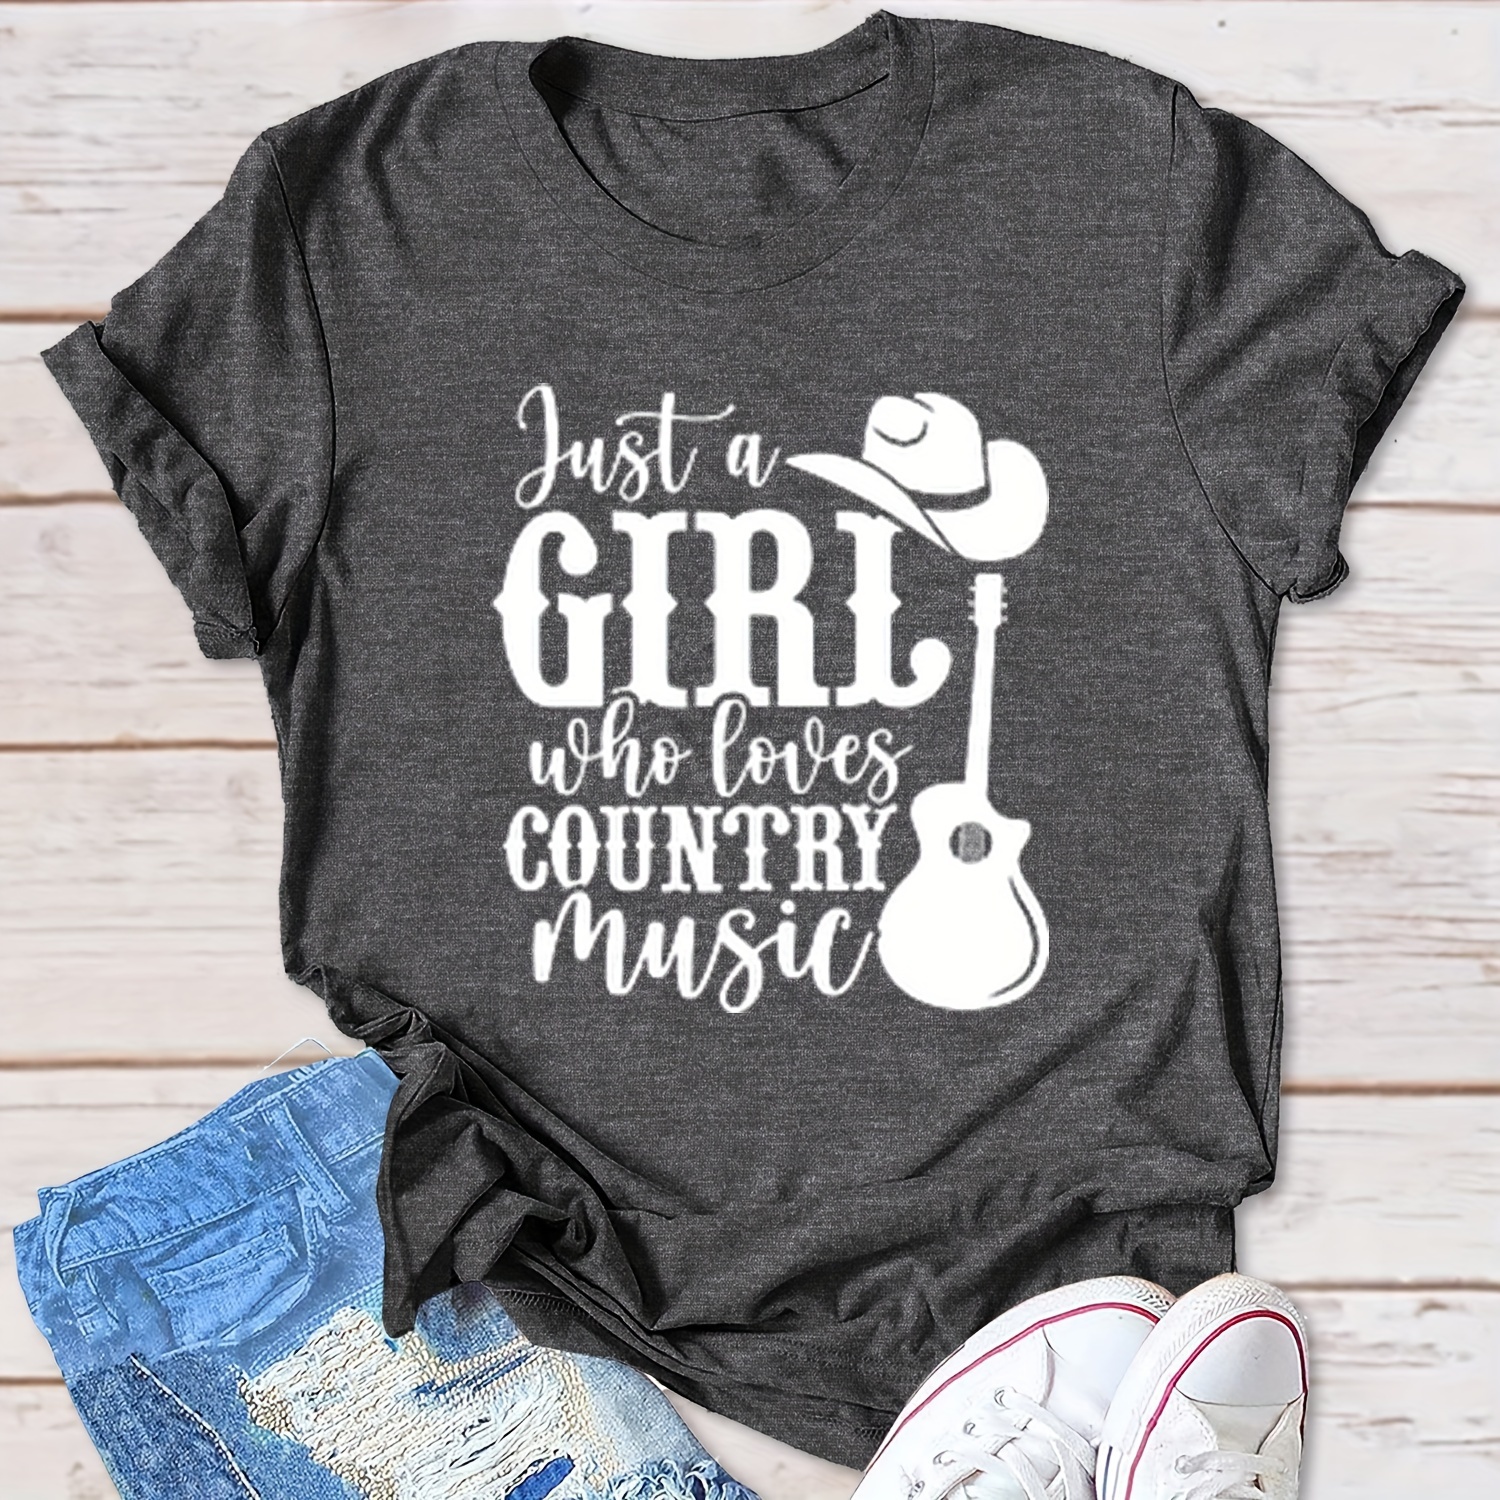 

1pc Heat Transfer Sticker, Just A Girl Who Loves Country Music, Diy Iron-on Decals For Clothes, T-shirt Making, Pillow Decorating, Clothing Supplies & Appliques